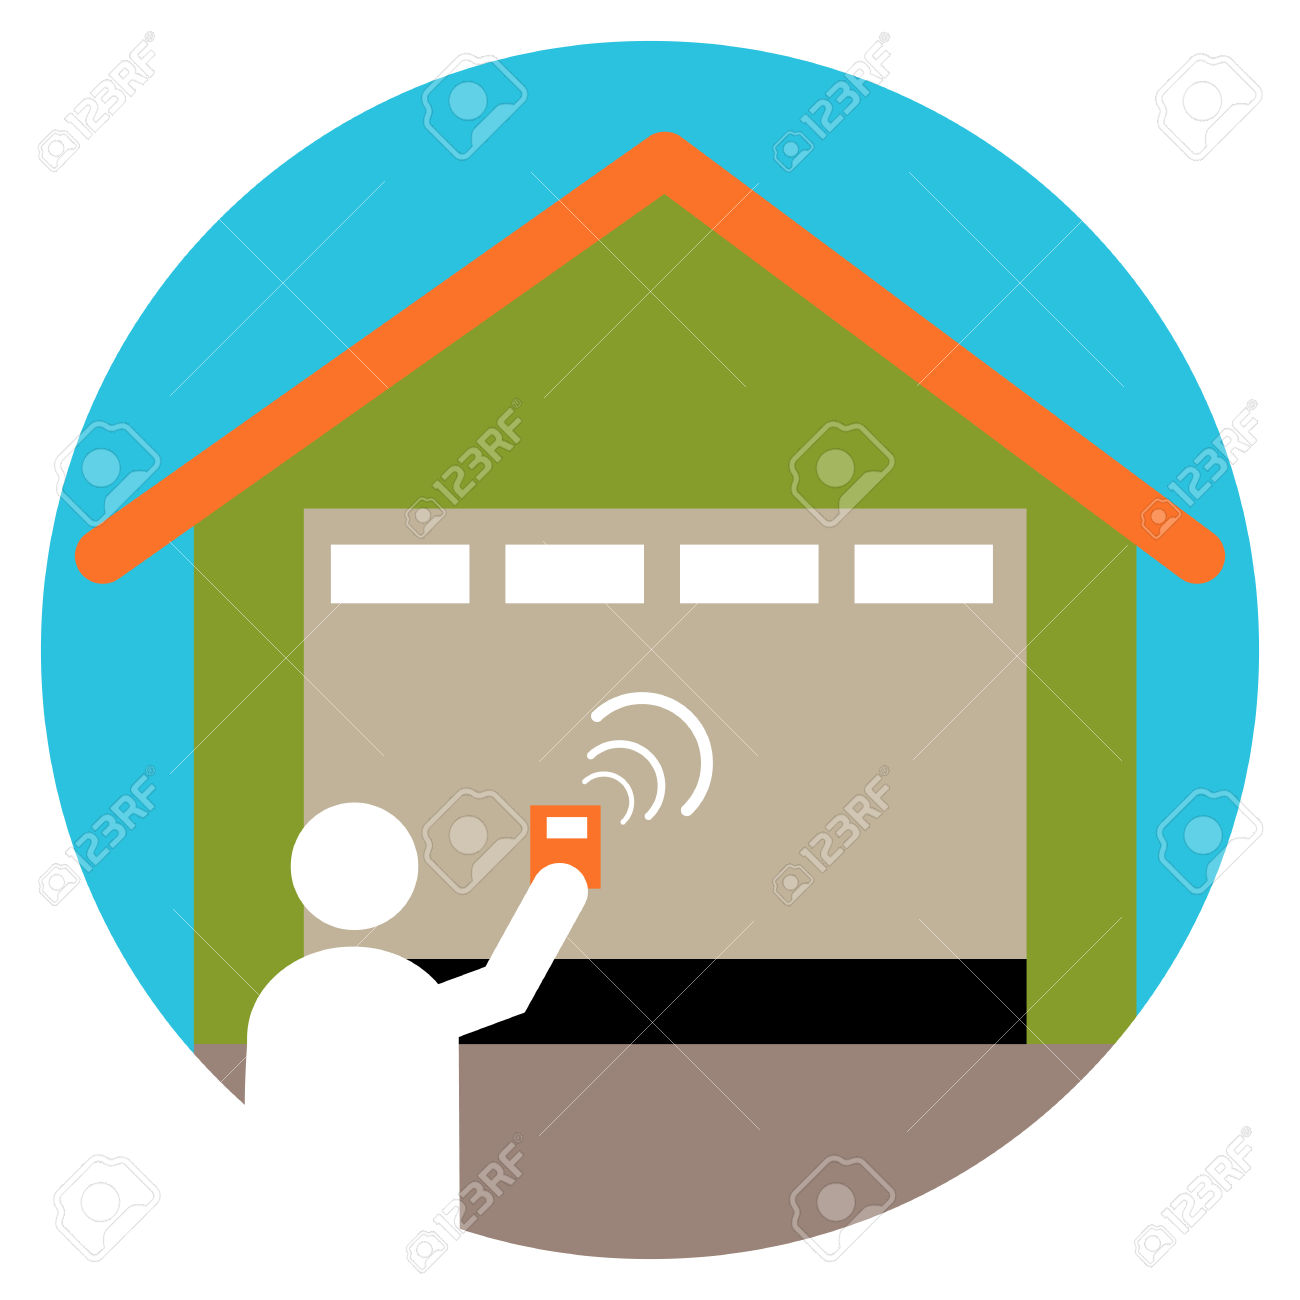 An Image Of A Garage Door Opener Icon. Royalty Free Cliparts.